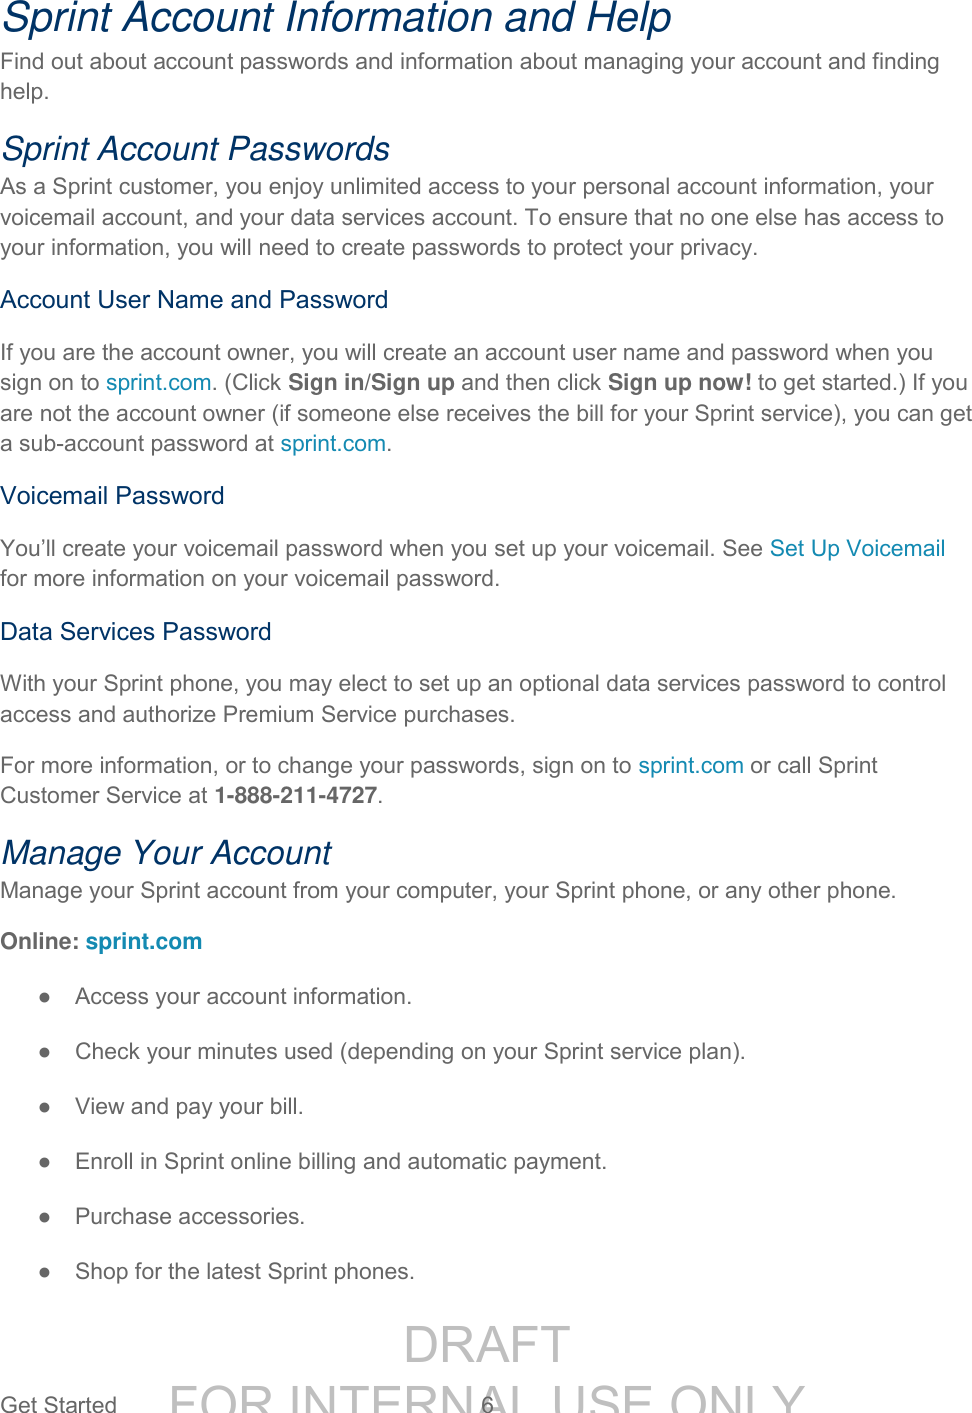 DRAFT FOR INTERNAL USE ONLYGet Started  6   Sprint Account Information and Help Find out about account passwords and information about managing your account and finding help. Sprint Account Passwords As a Sprint customer, you enjoy unlimited access to your personal account information, your voicemail account, and your data services account. To ensure that no one else has access to your information, you will need to create passwords to protect your privacy. Account User Name and Password If you are the account owner, you will create an account user name and password when you sign on to sprint.com. (Click Sign in/Sign up and then click Sign up now! to get started.) If you are not the account owner (if someone else receives the bill for your Sprint service), you can get a sub-account password at sprint.com. Voicemail Password You’ll create your voicemail password when you set up your voicemail. See Set Up Voicemail for more information on your voicemail password. Data Services Password With your Sprint phone, you may elect to set up an optional data services password to control access and authorize Premium Service purchases. For more information, or to change your passwords, sign on to sprint.com or call Sprint Customer Service at 1-888-211-4727. Manage Your Account Manage your Sprint account from your computer, your Sprint phone, or any other phone. Online: sprint.com ●  Access your account information. ●  Check your minutes used (depending on your Sprint service plan). ●  View and pay your bill. ●  Enroll in Sprint online billing and automatic payment. ●  Purchase accessories. ●  Shop for the latest Sprint phones. 